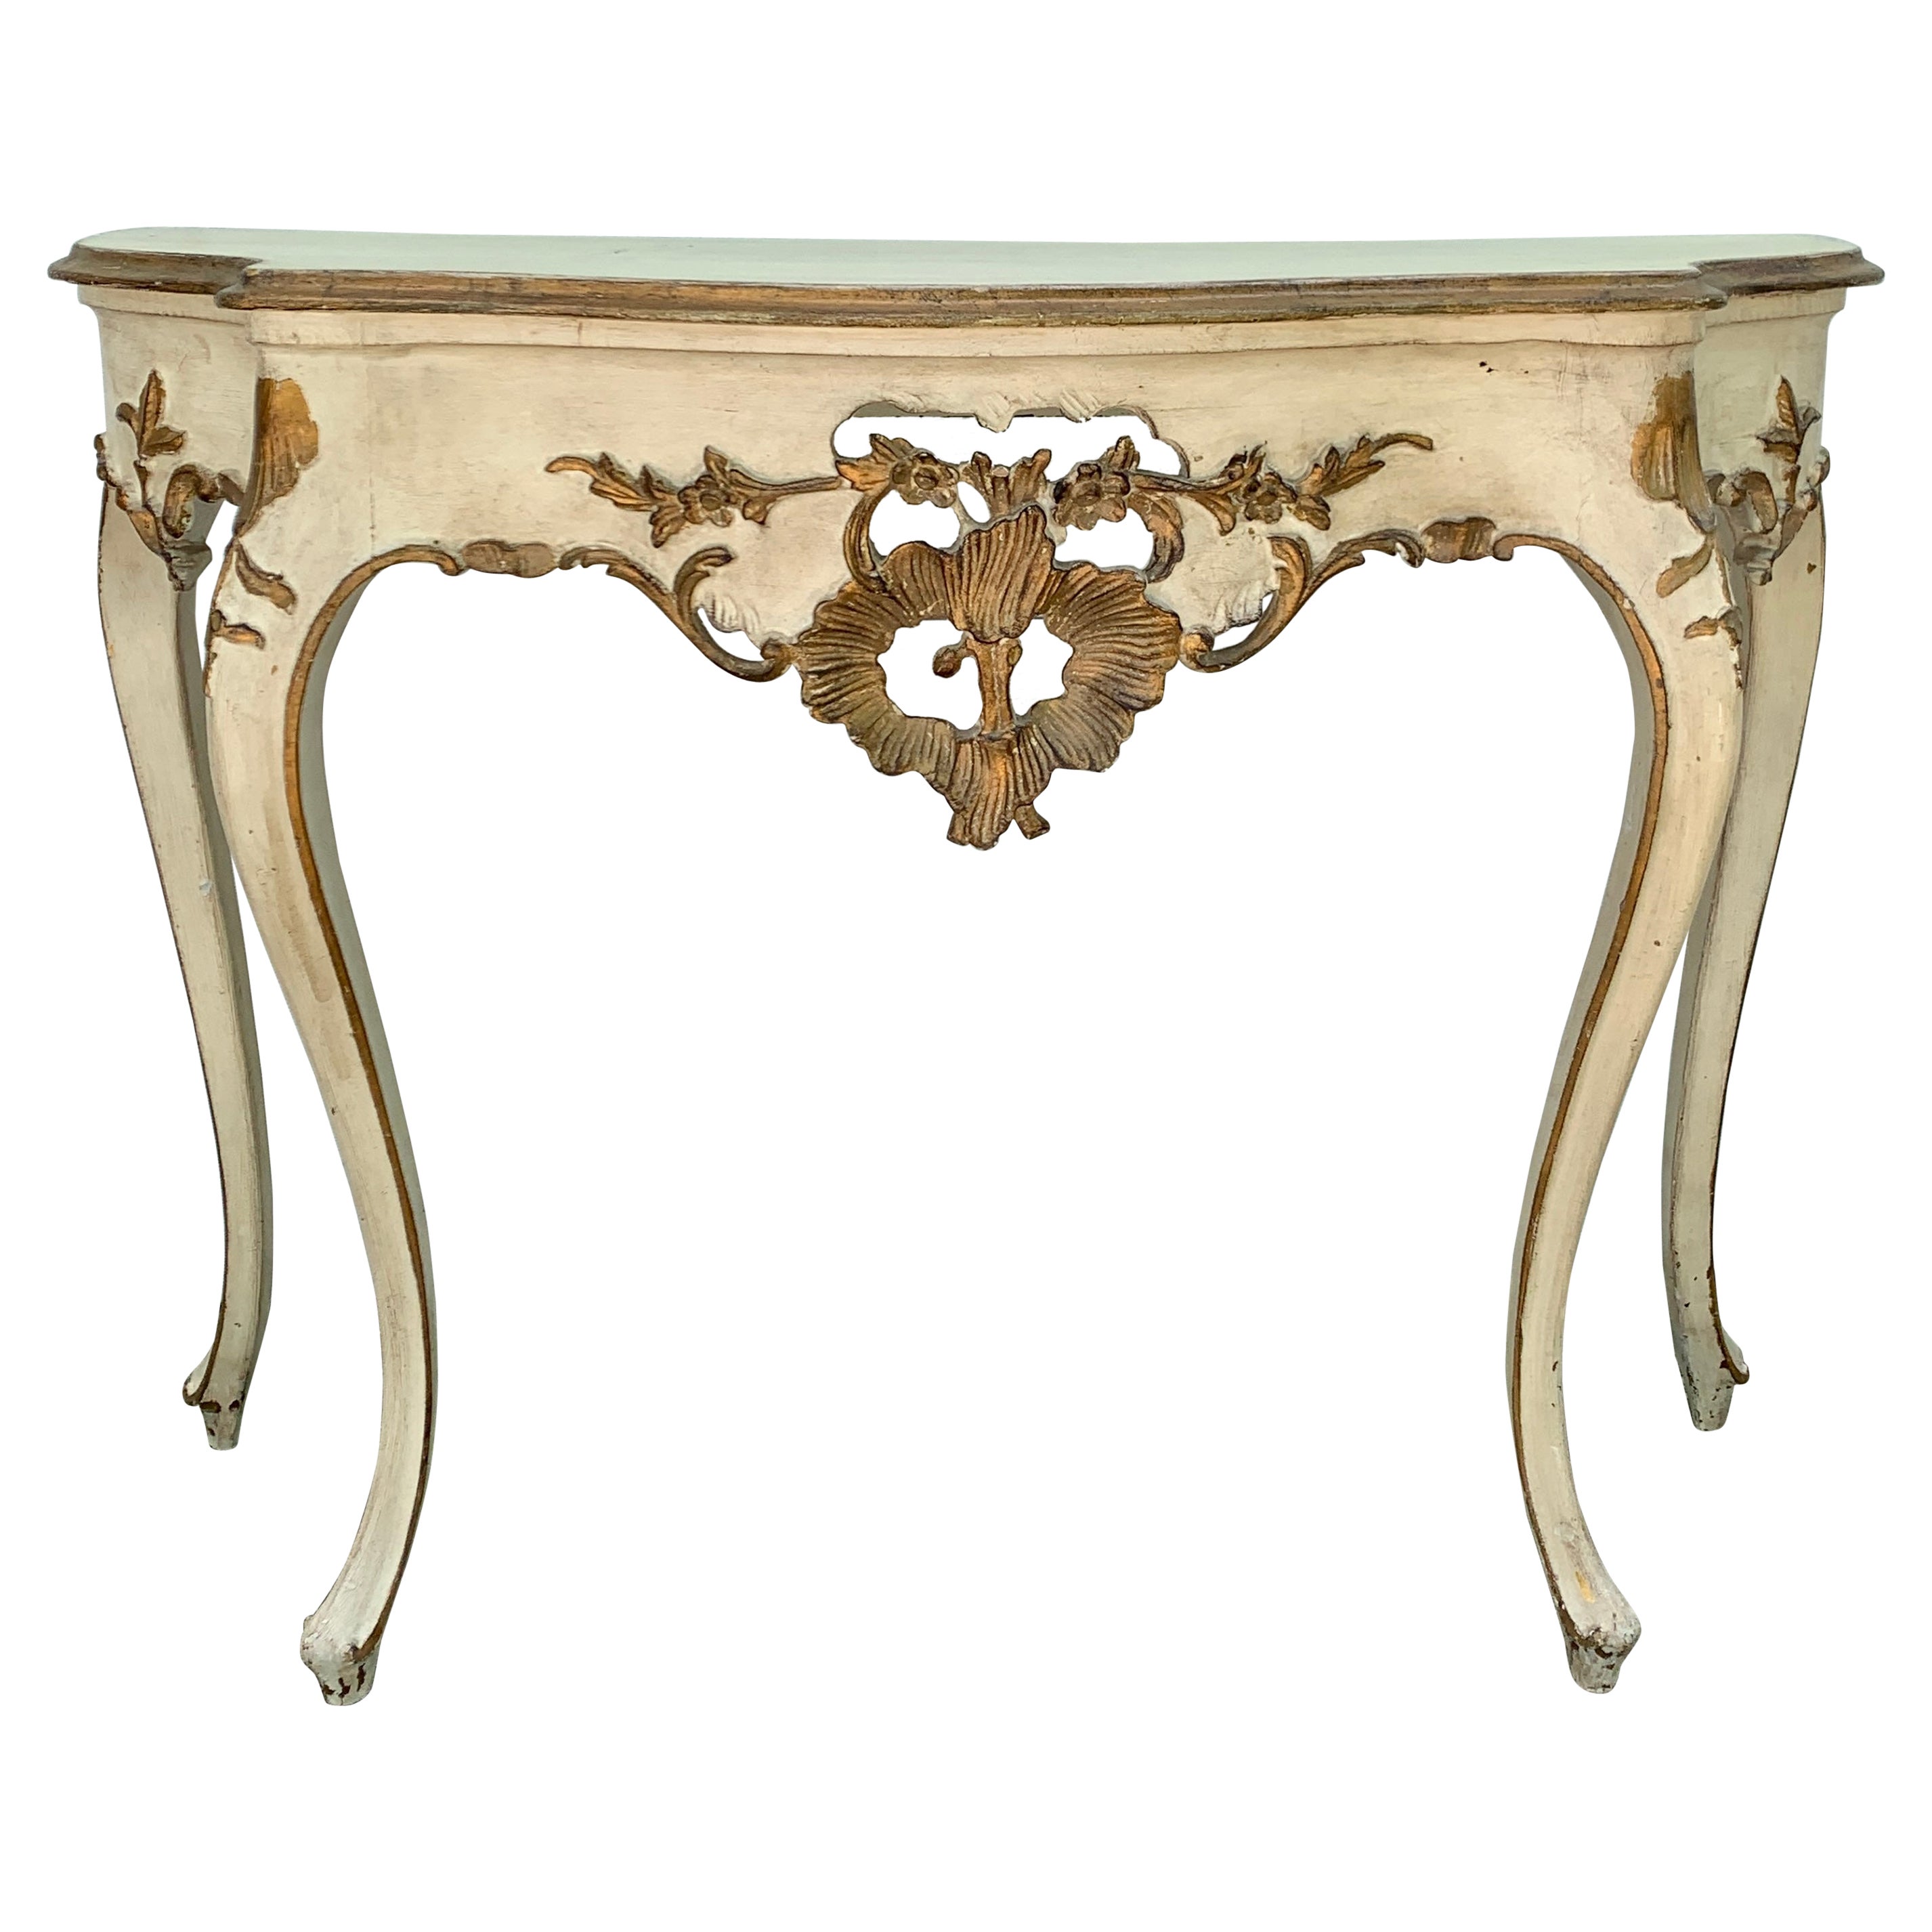 Antique French Provincial Louis XV Console Table